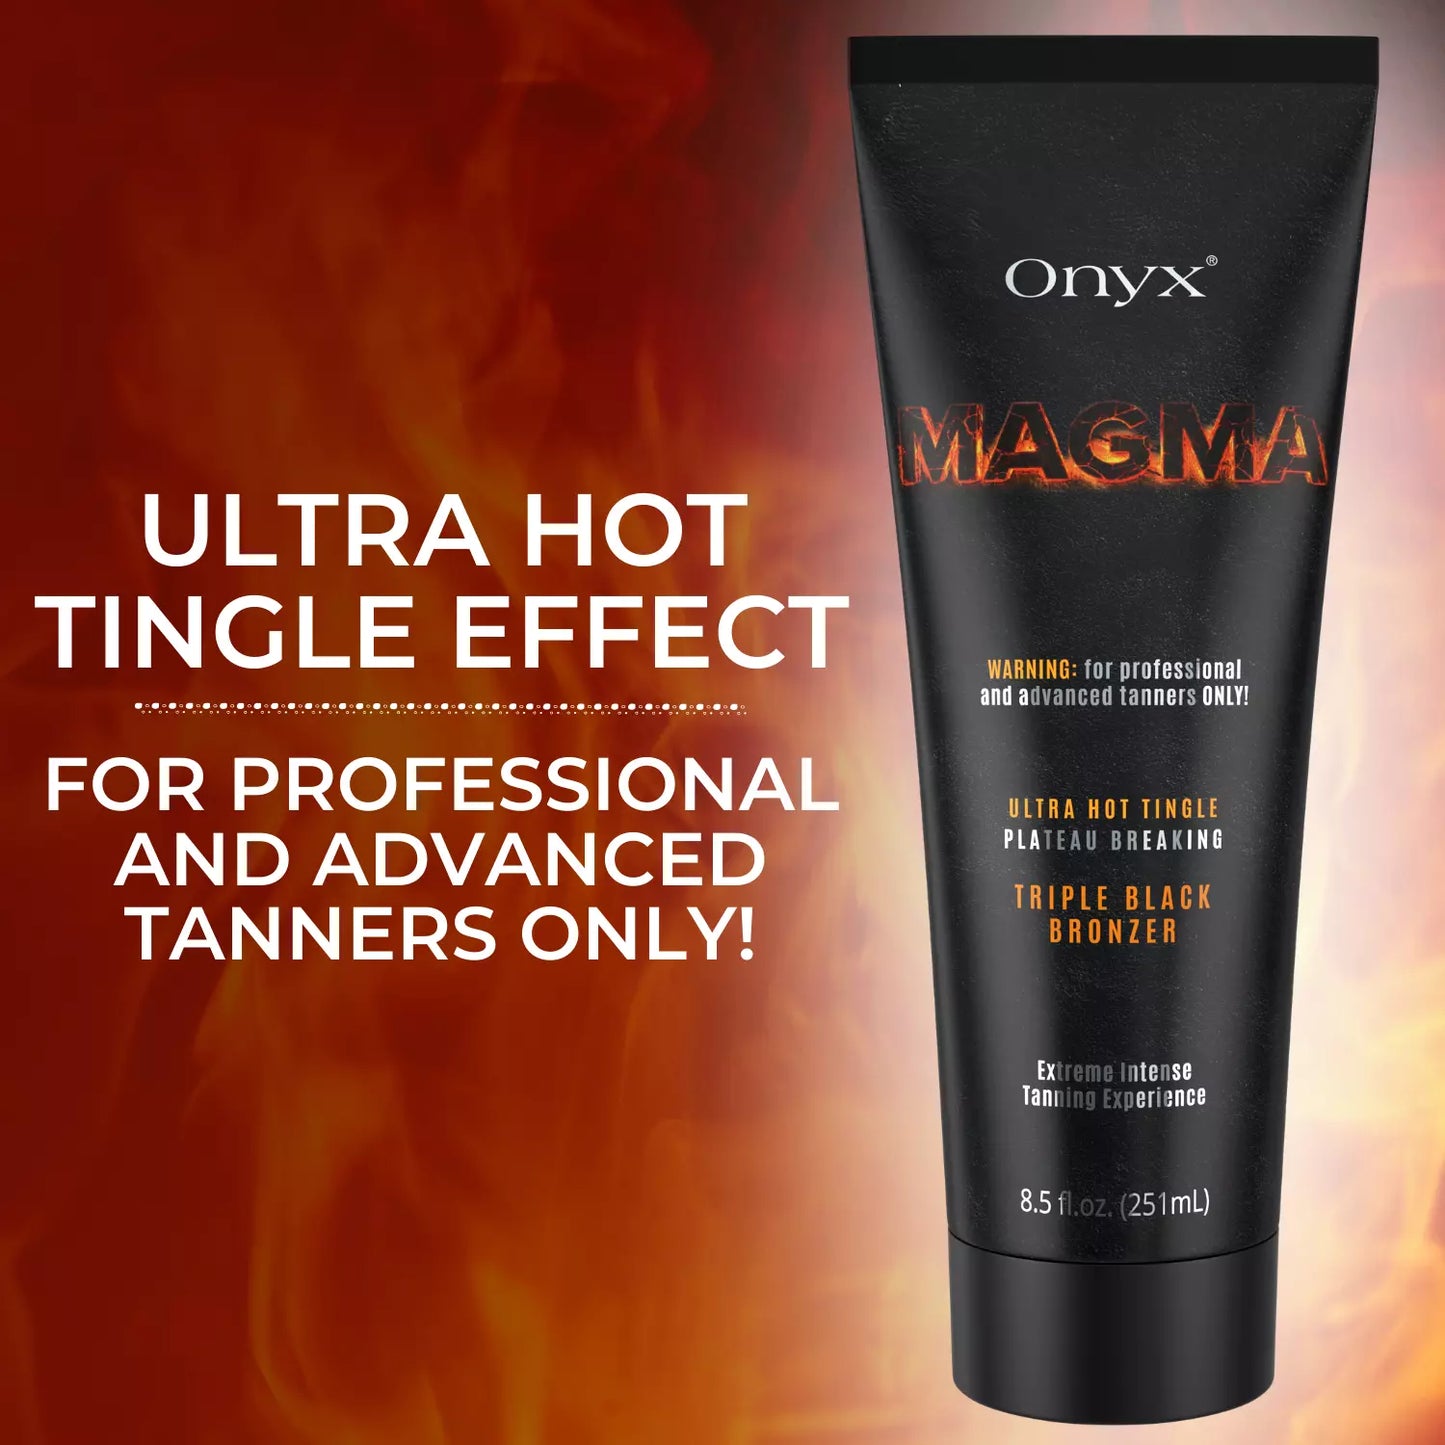 Tingle sunbed cream for professional tanners